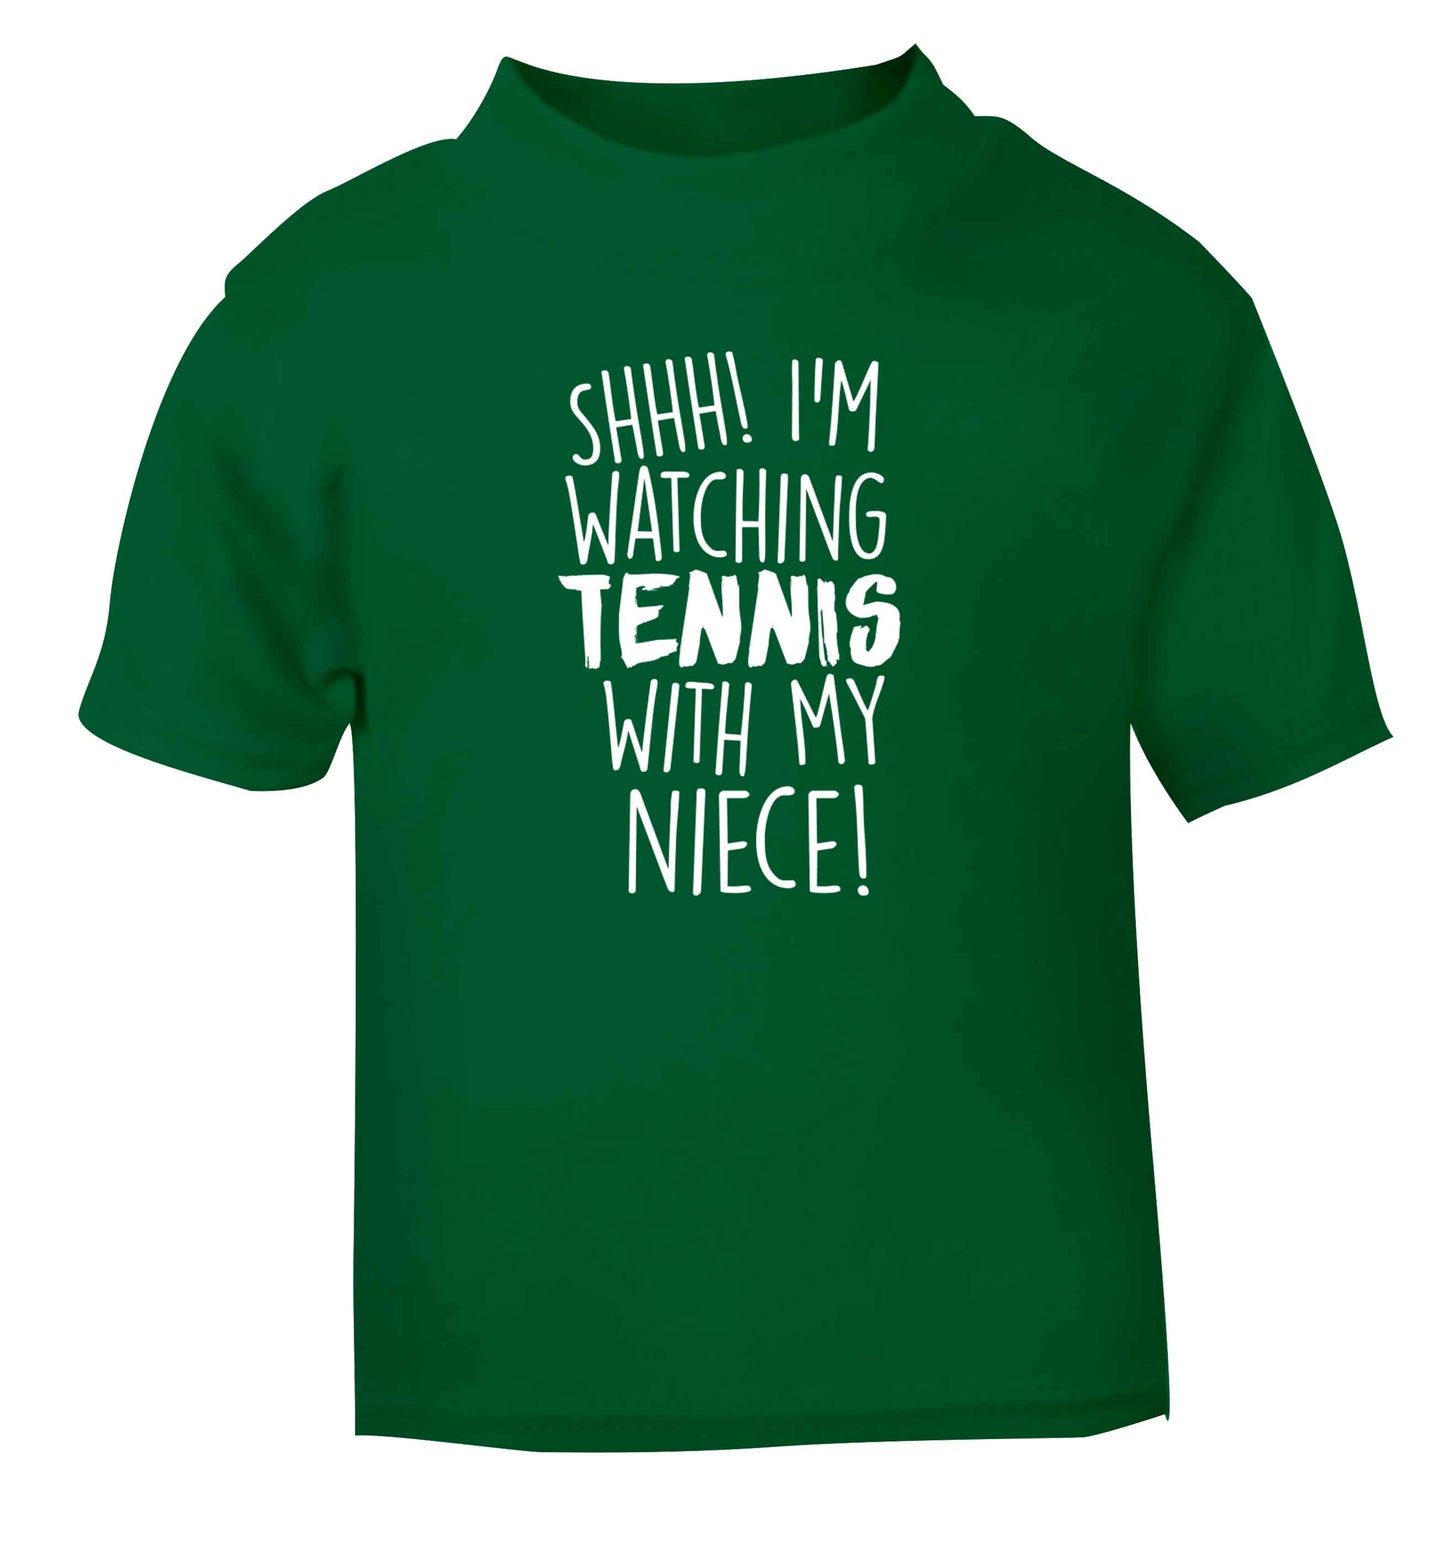 Shh! I'm watching tennis with my niece! green Baby Toddler Tshirt 2 Years